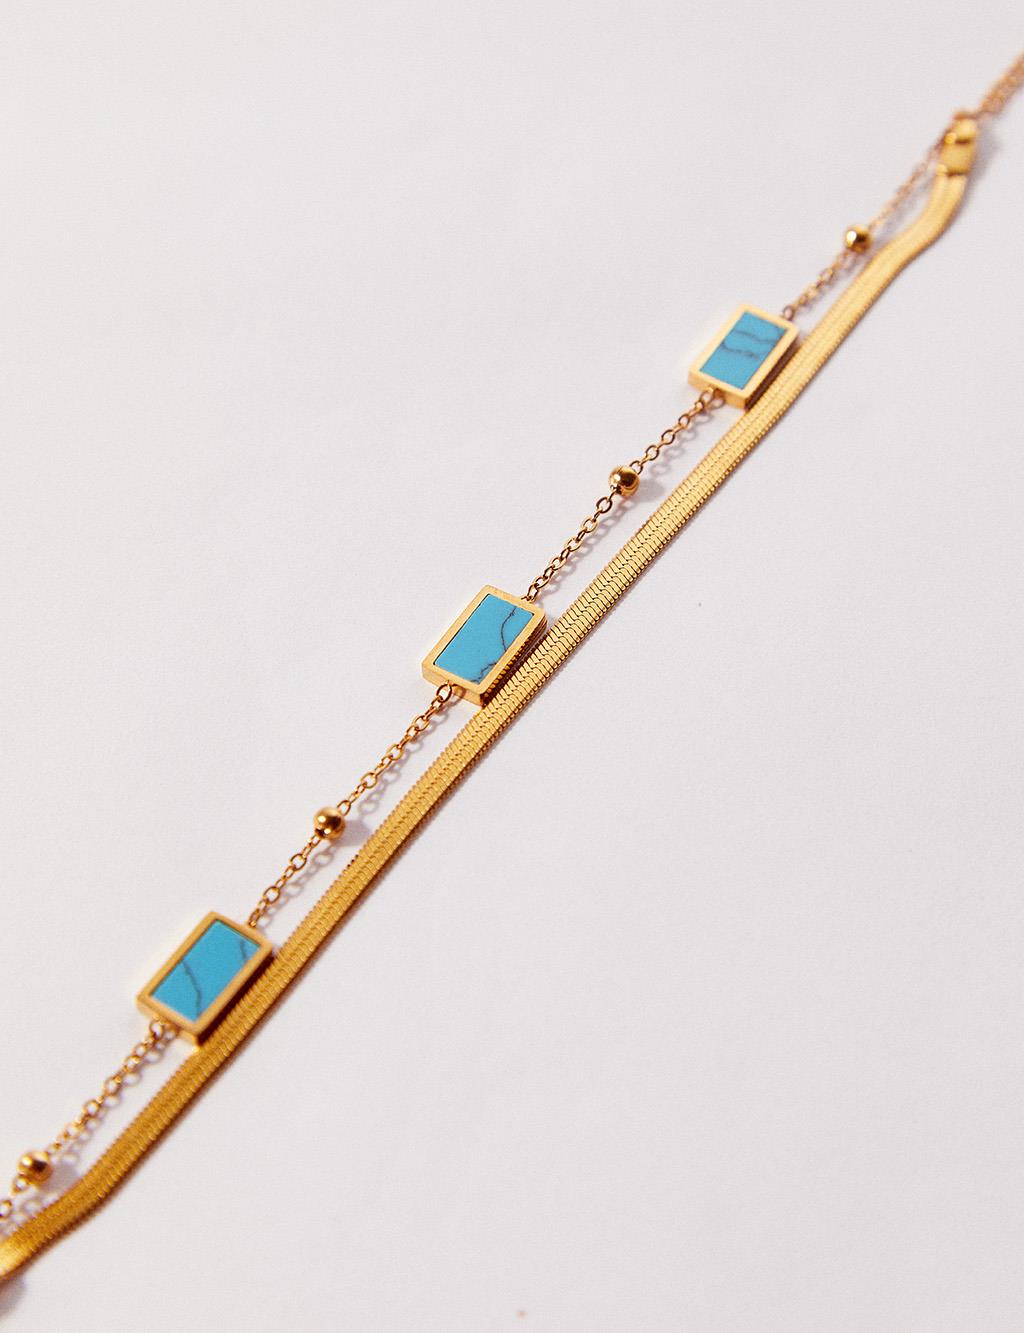 Turquoise Stone Double Chain Steel Bracelet Sterling Gold Color